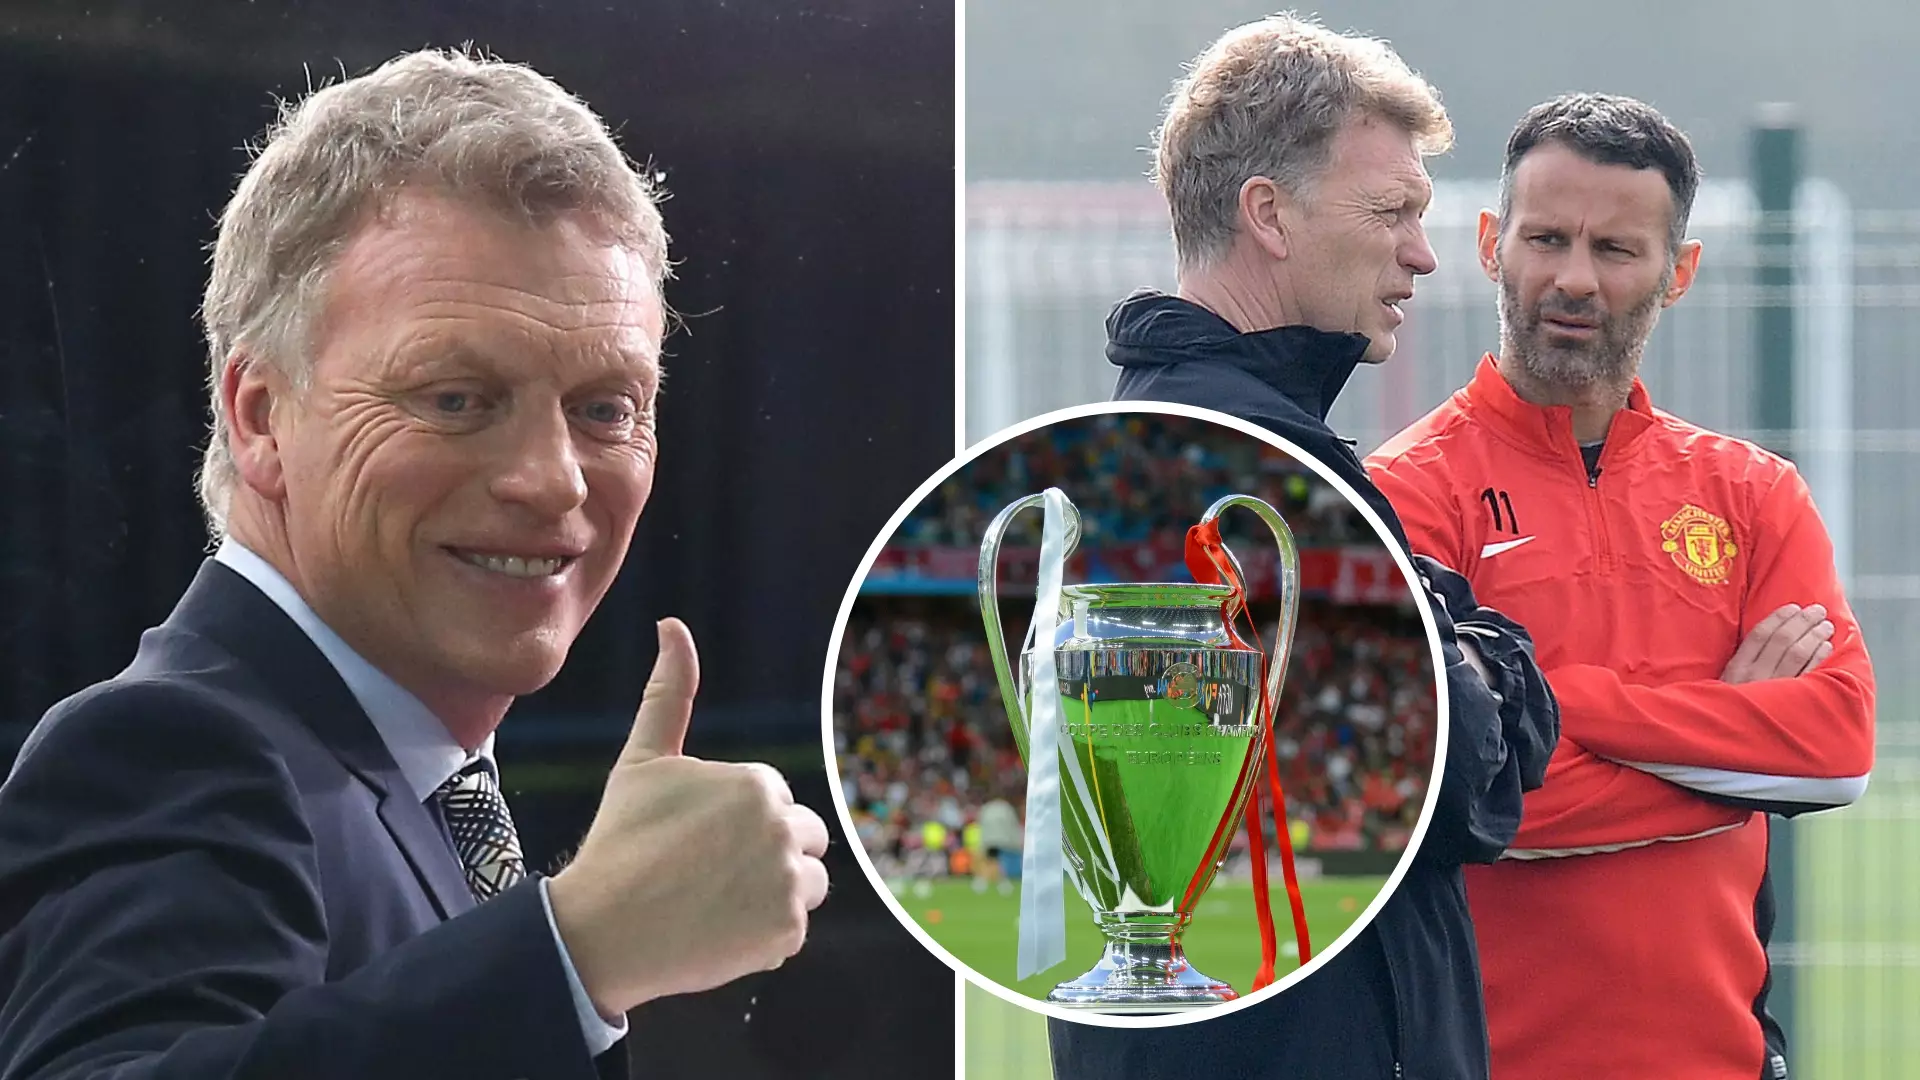 David Moyes Claims Manchester United Would ‘Still Be In The Champions League’ If He Were Managing Them